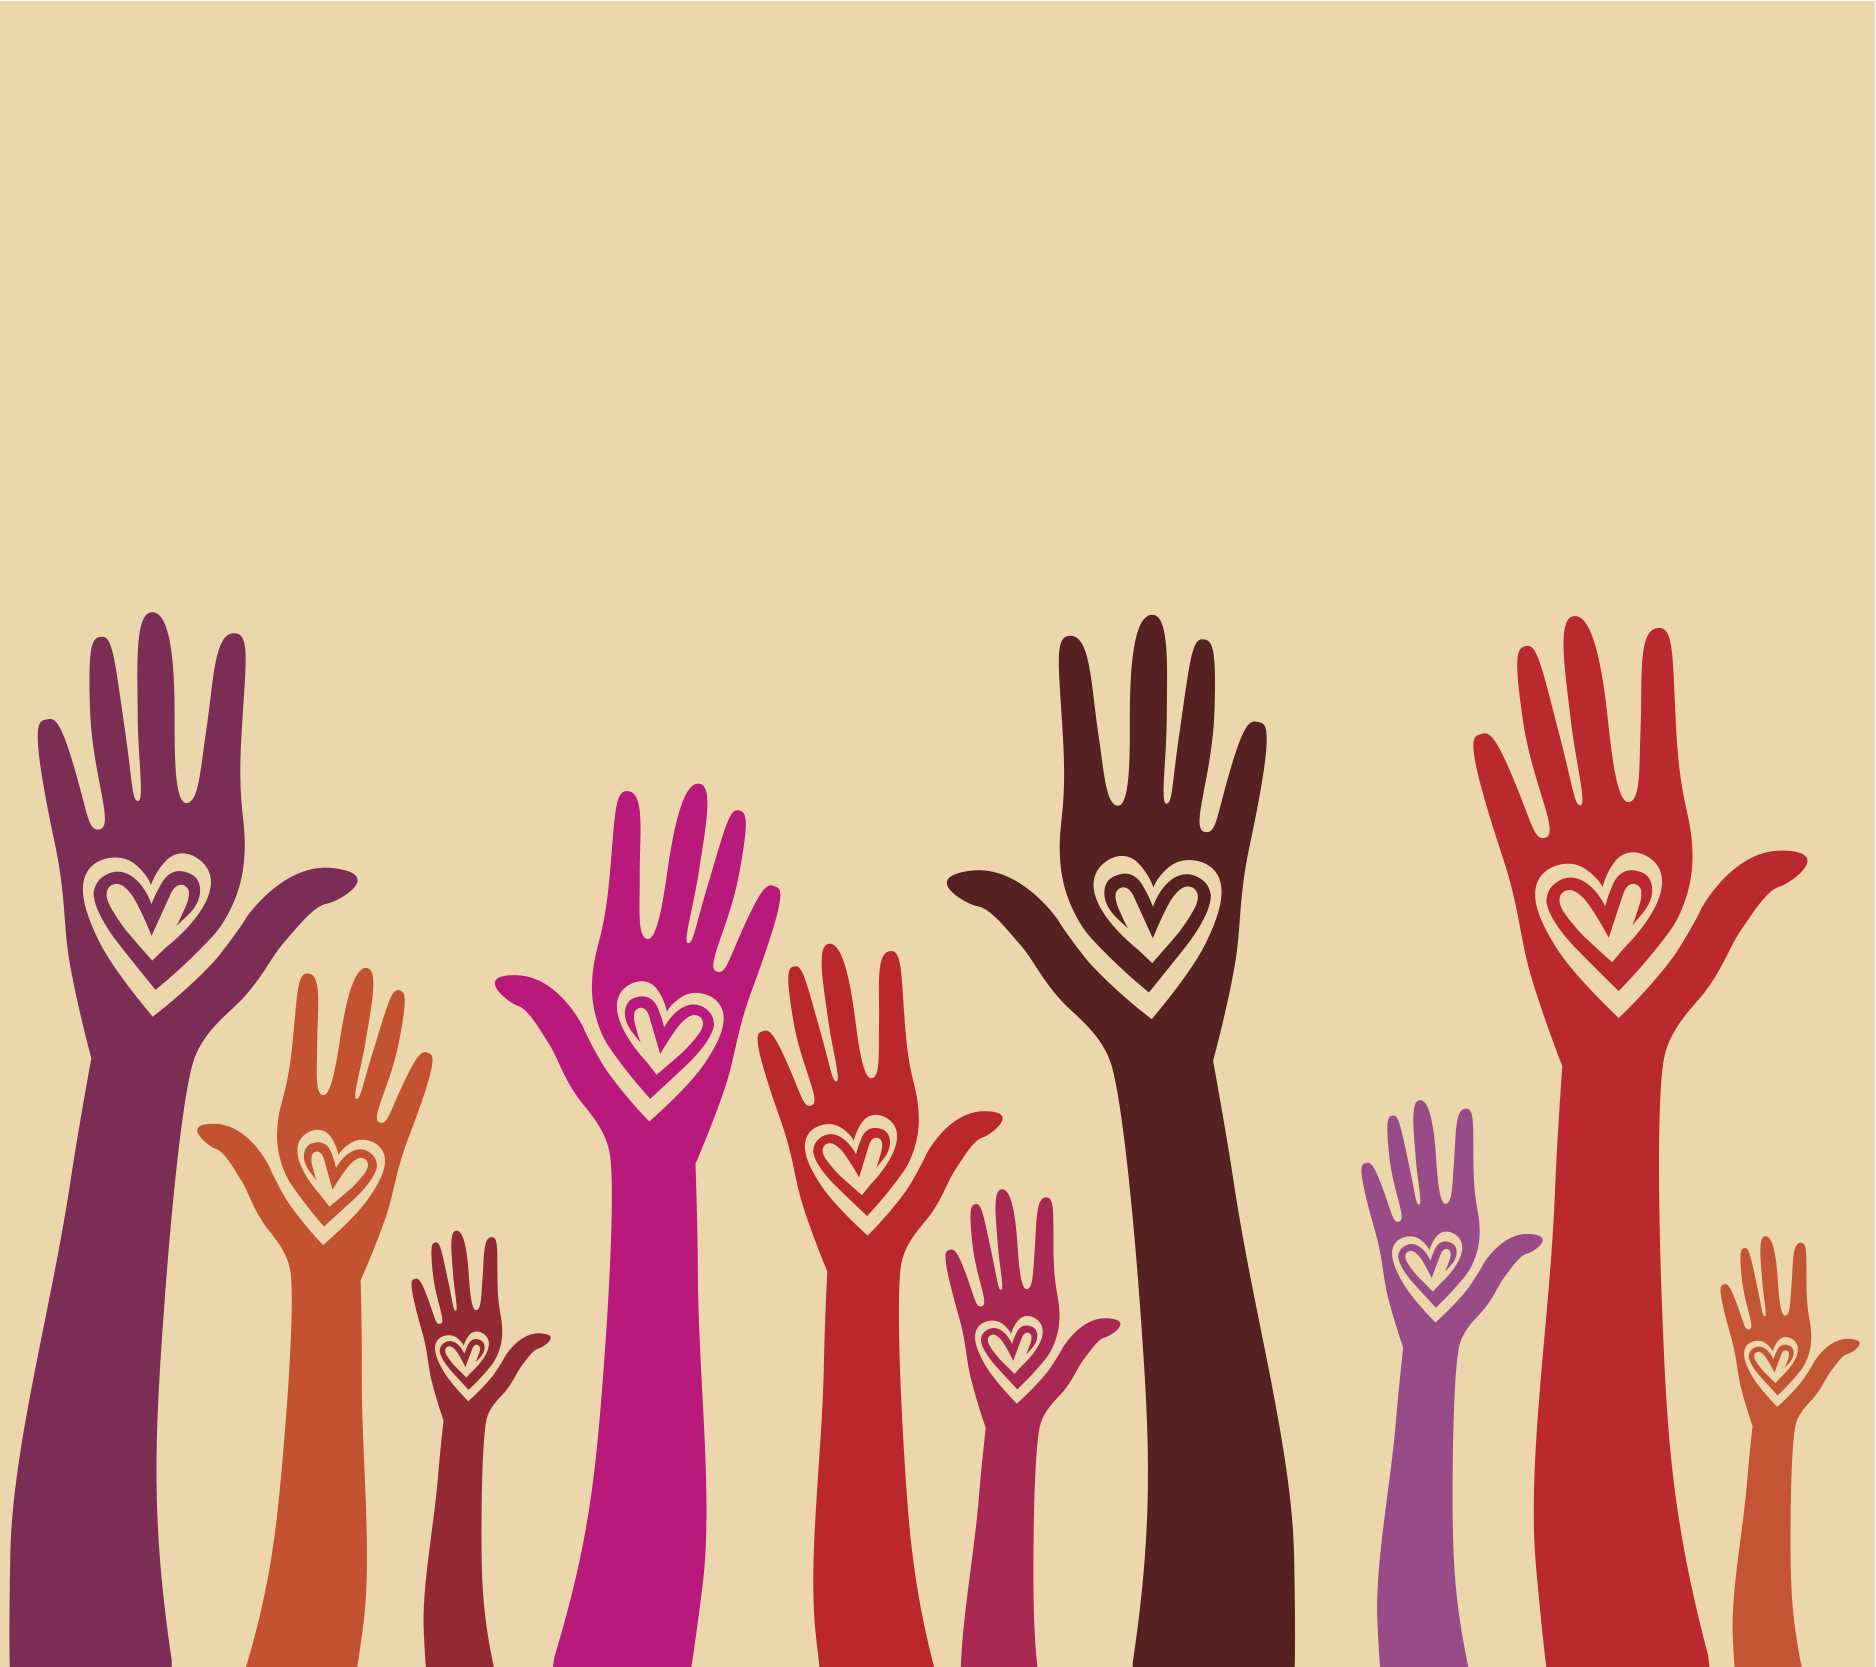 Helping Hands Images Wallpapers